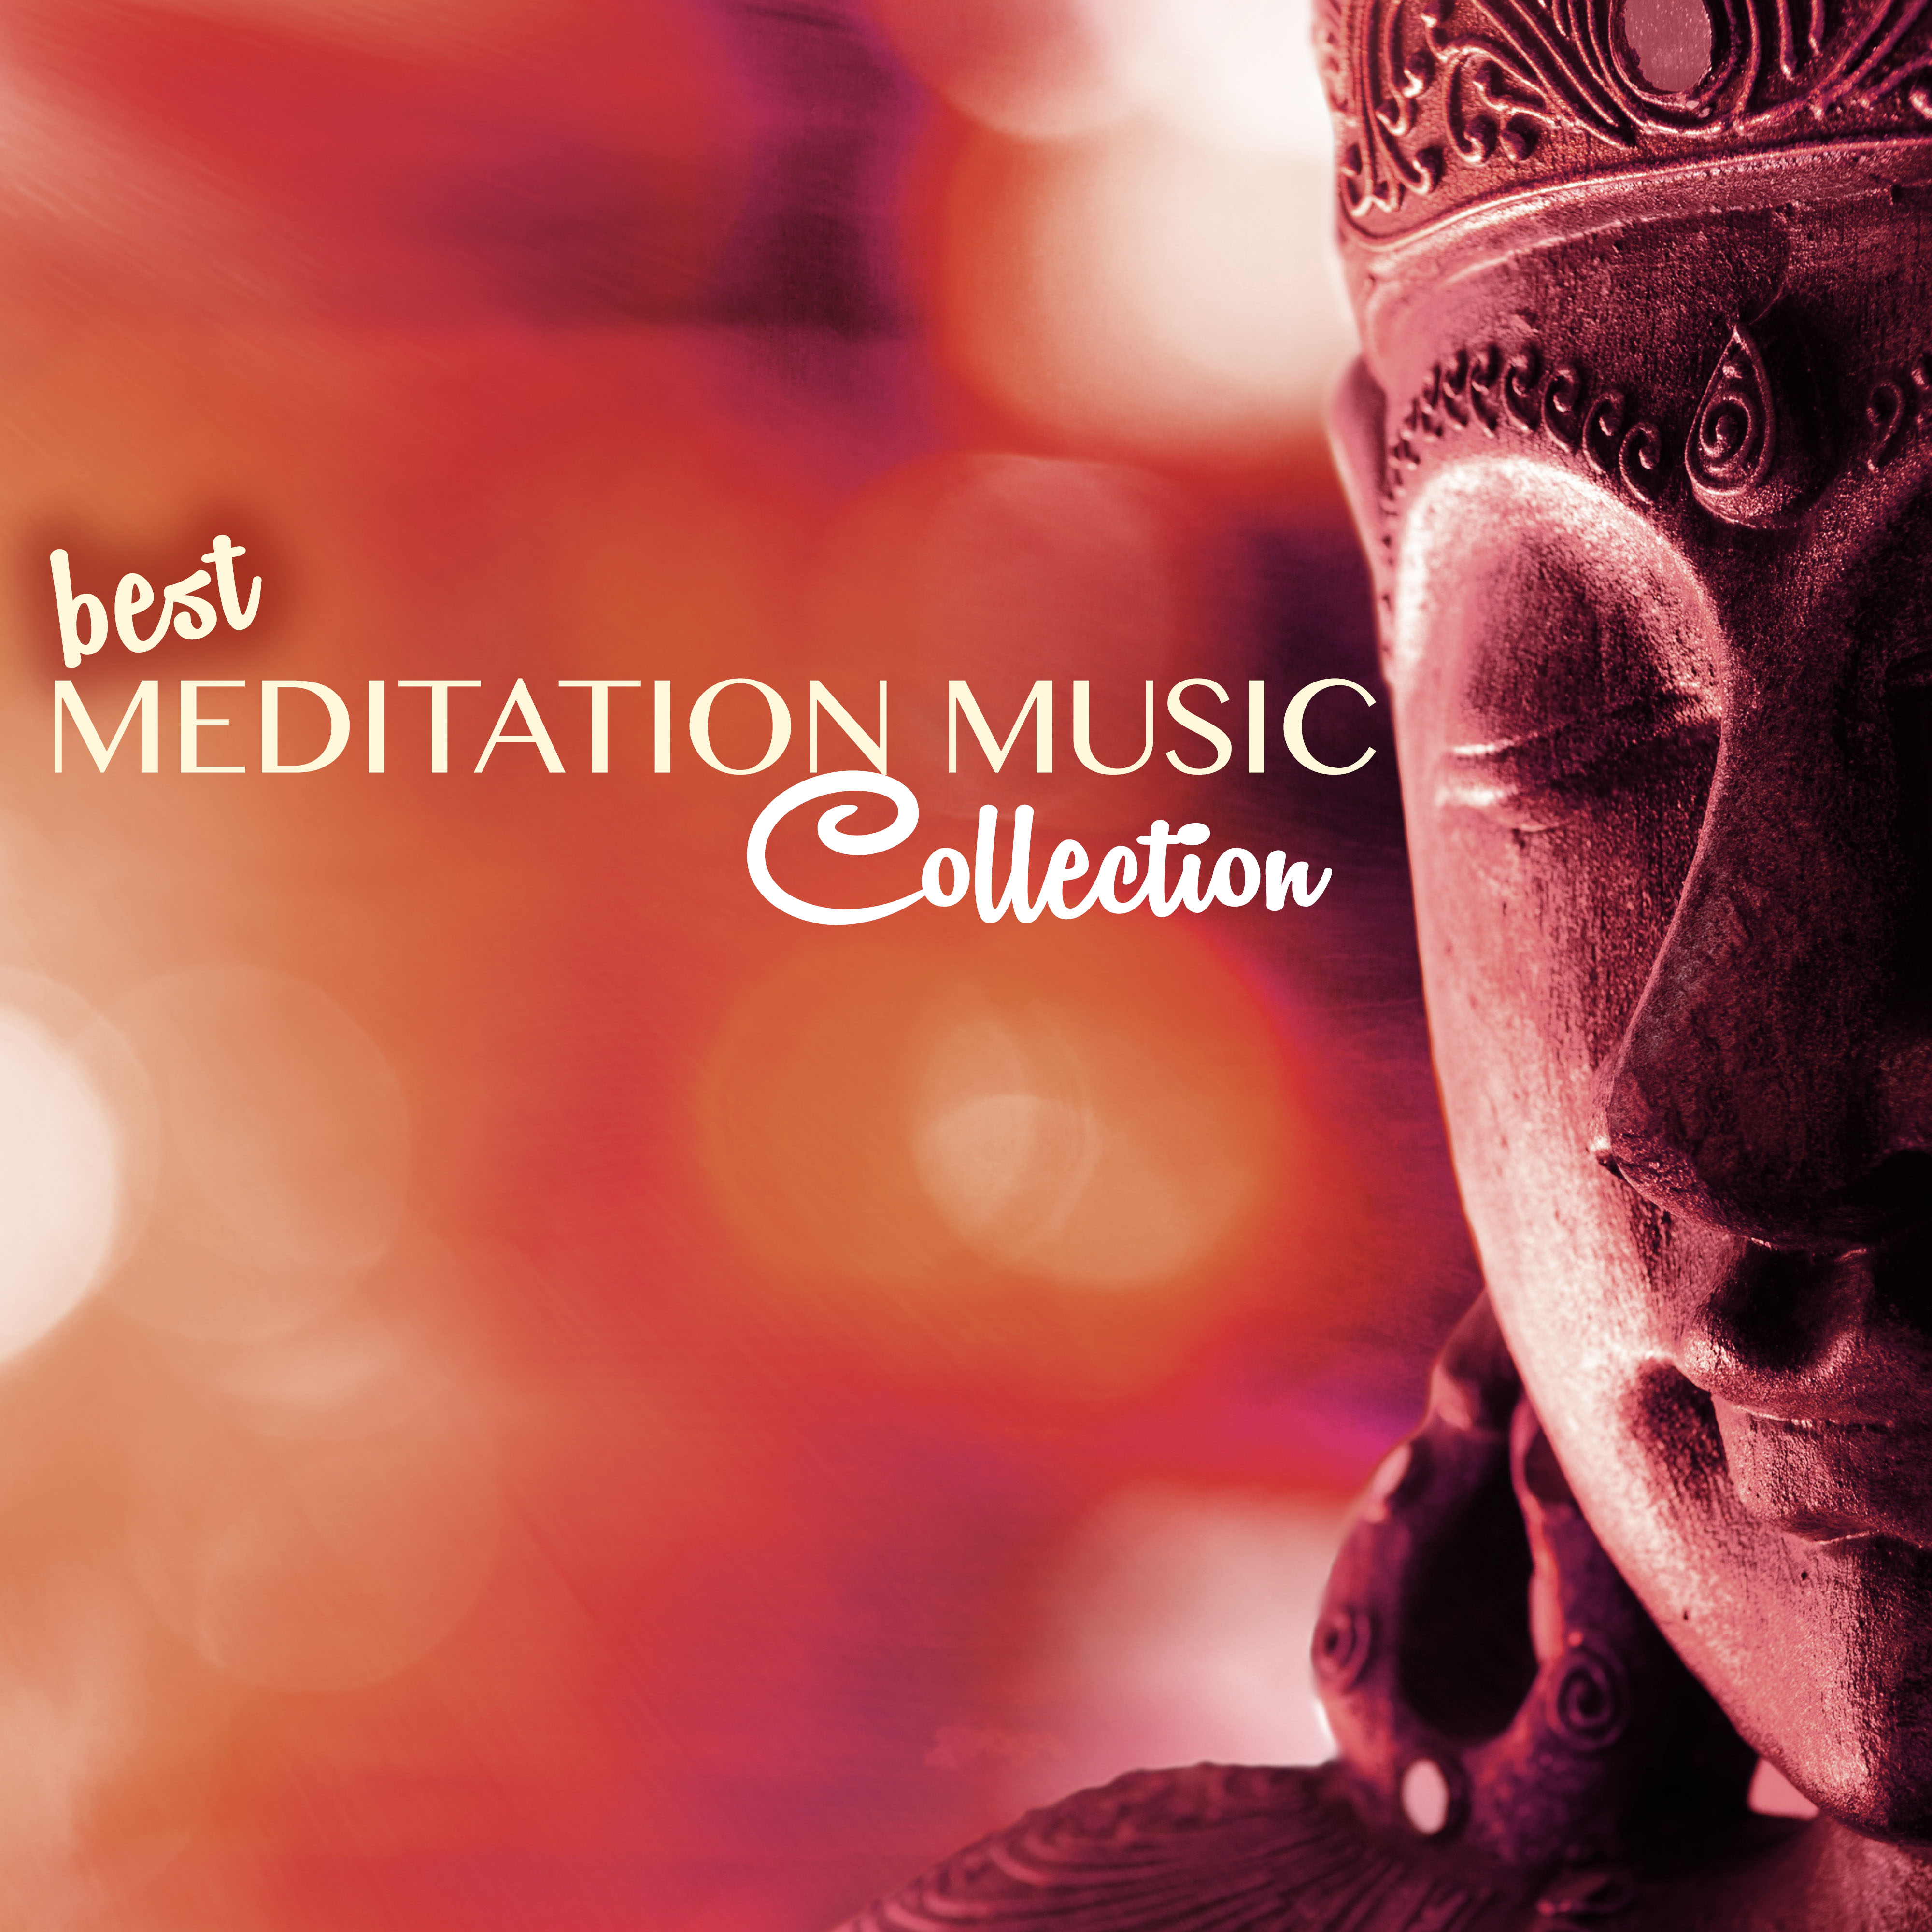 Best Meditation Music Collection